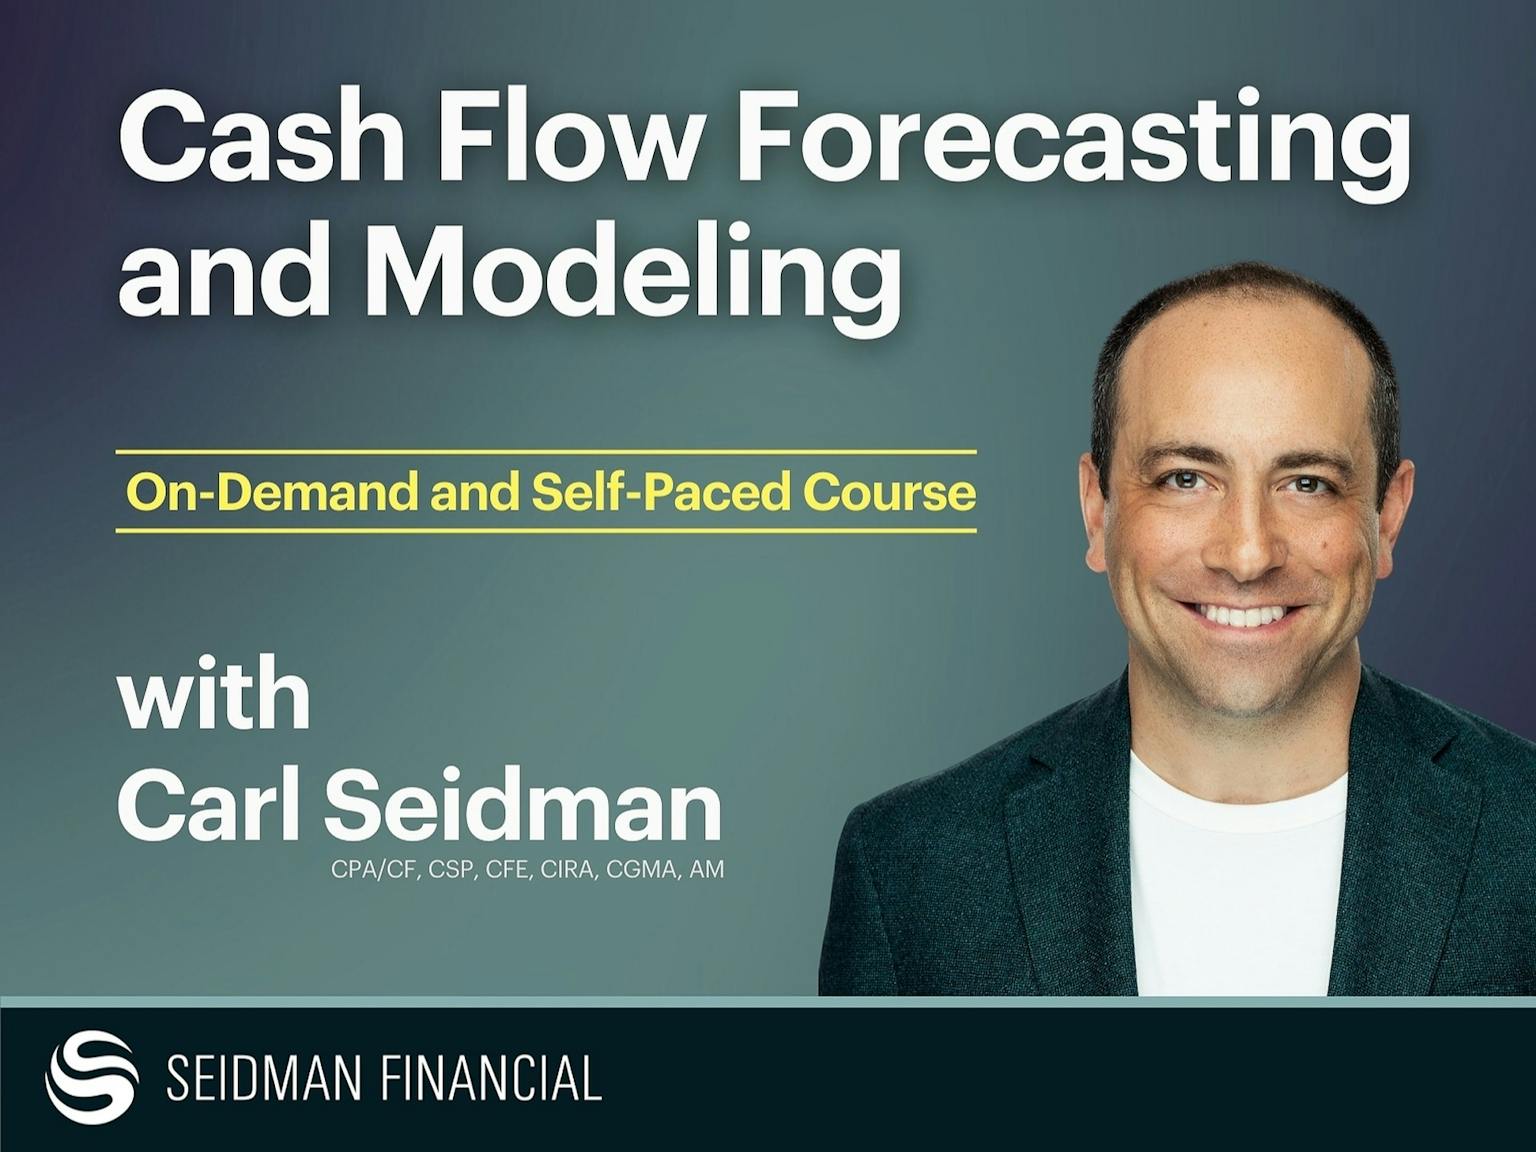 Would you rather learn Cash Flow Forecasting and Modeling on your own time and at your own pace?